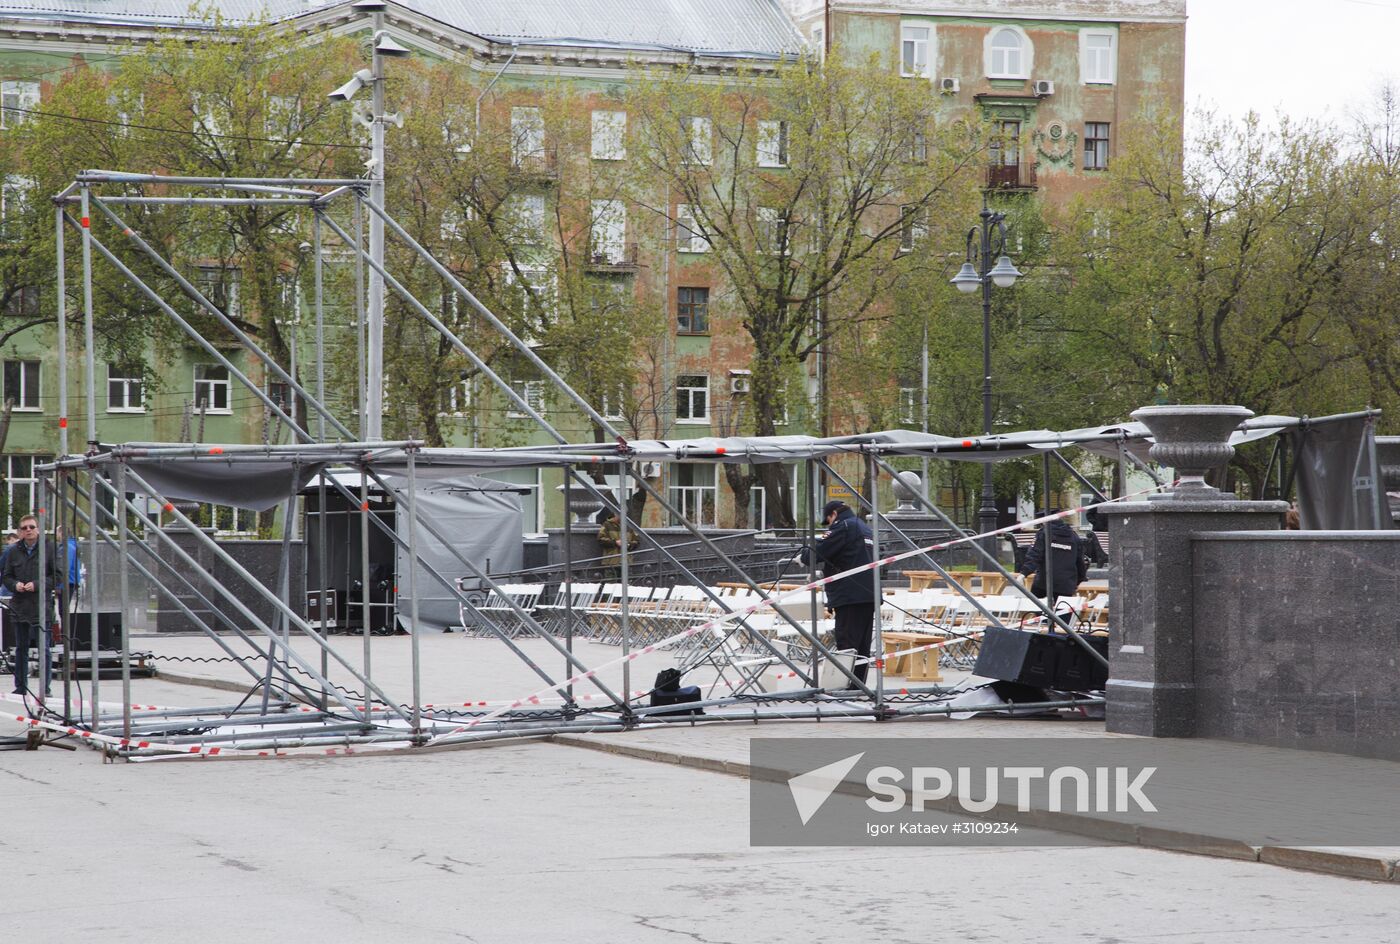 Metal structure collapses on children at center of culture in Perm